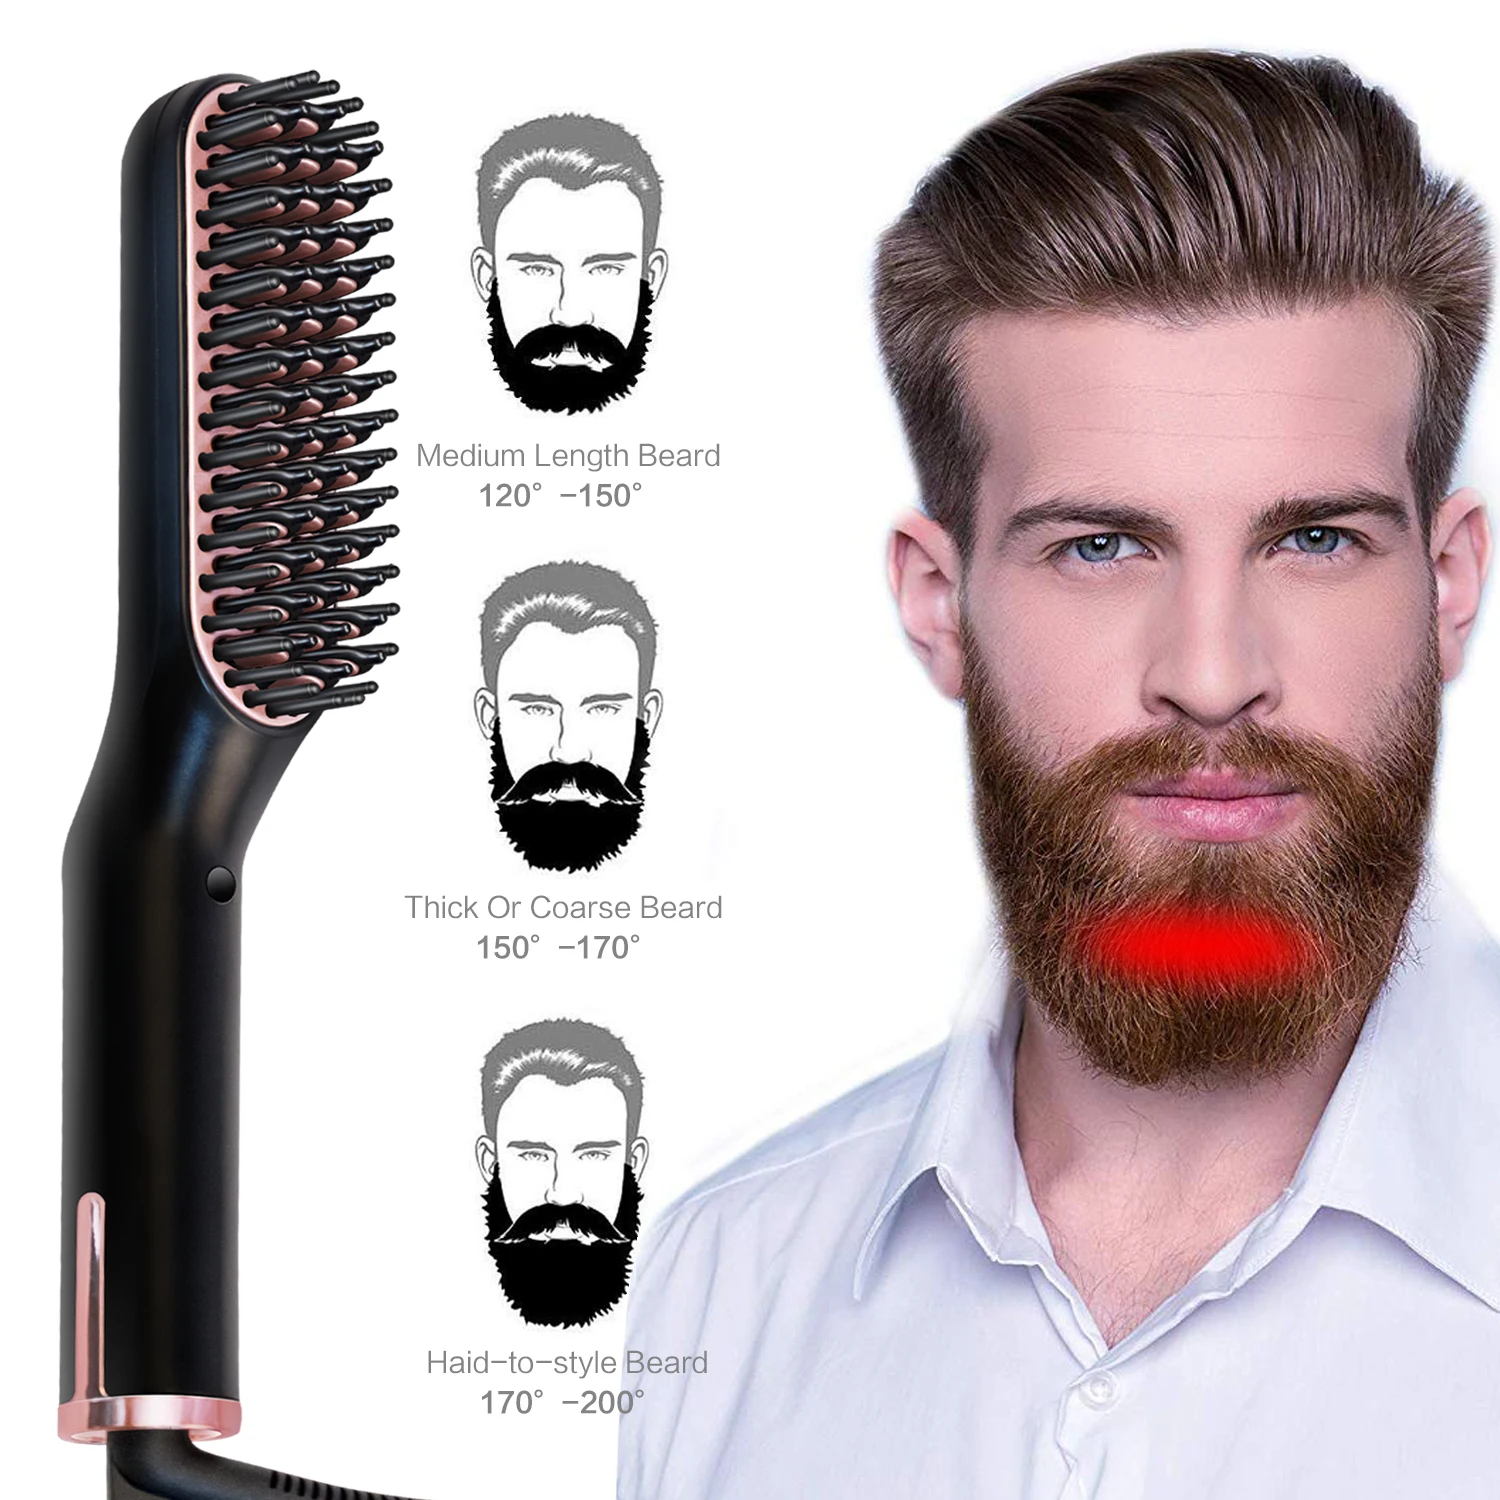 

Newest Design 3 in 1 Beard Straightener Tourmaline Ceramic Flat Iron Electric Hair Straightening Brushes Fast Heating Comb Style, Many colors for choice